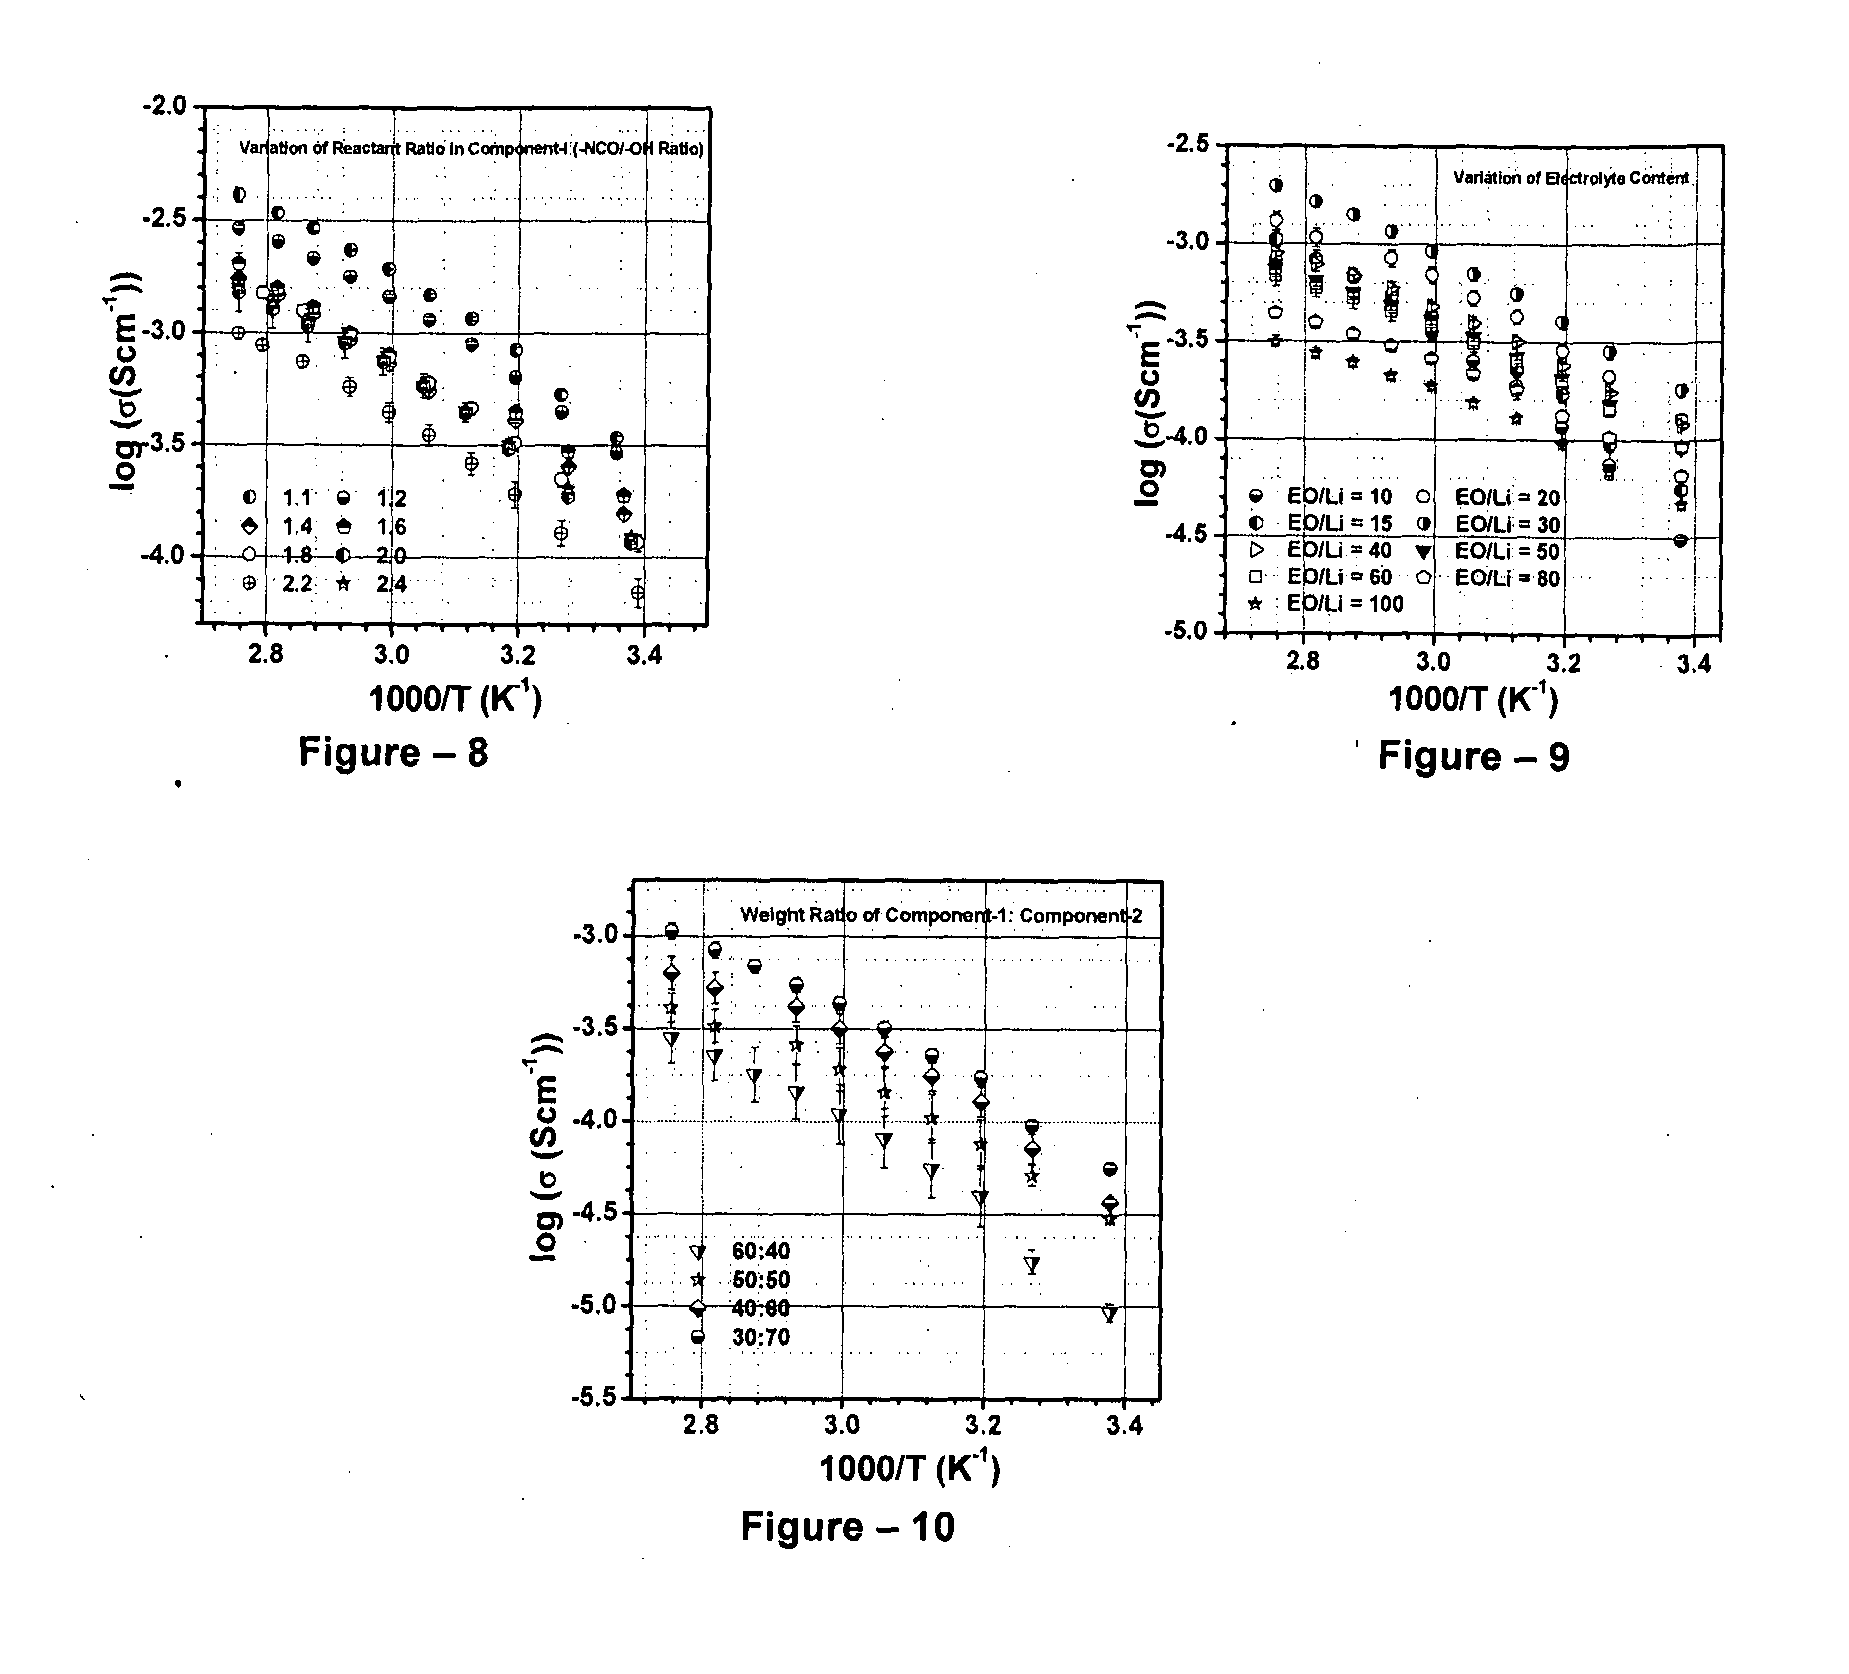 High-ionic conductivity electrolyte compositions comprising semi-interpenetrating polymer networks and their composites